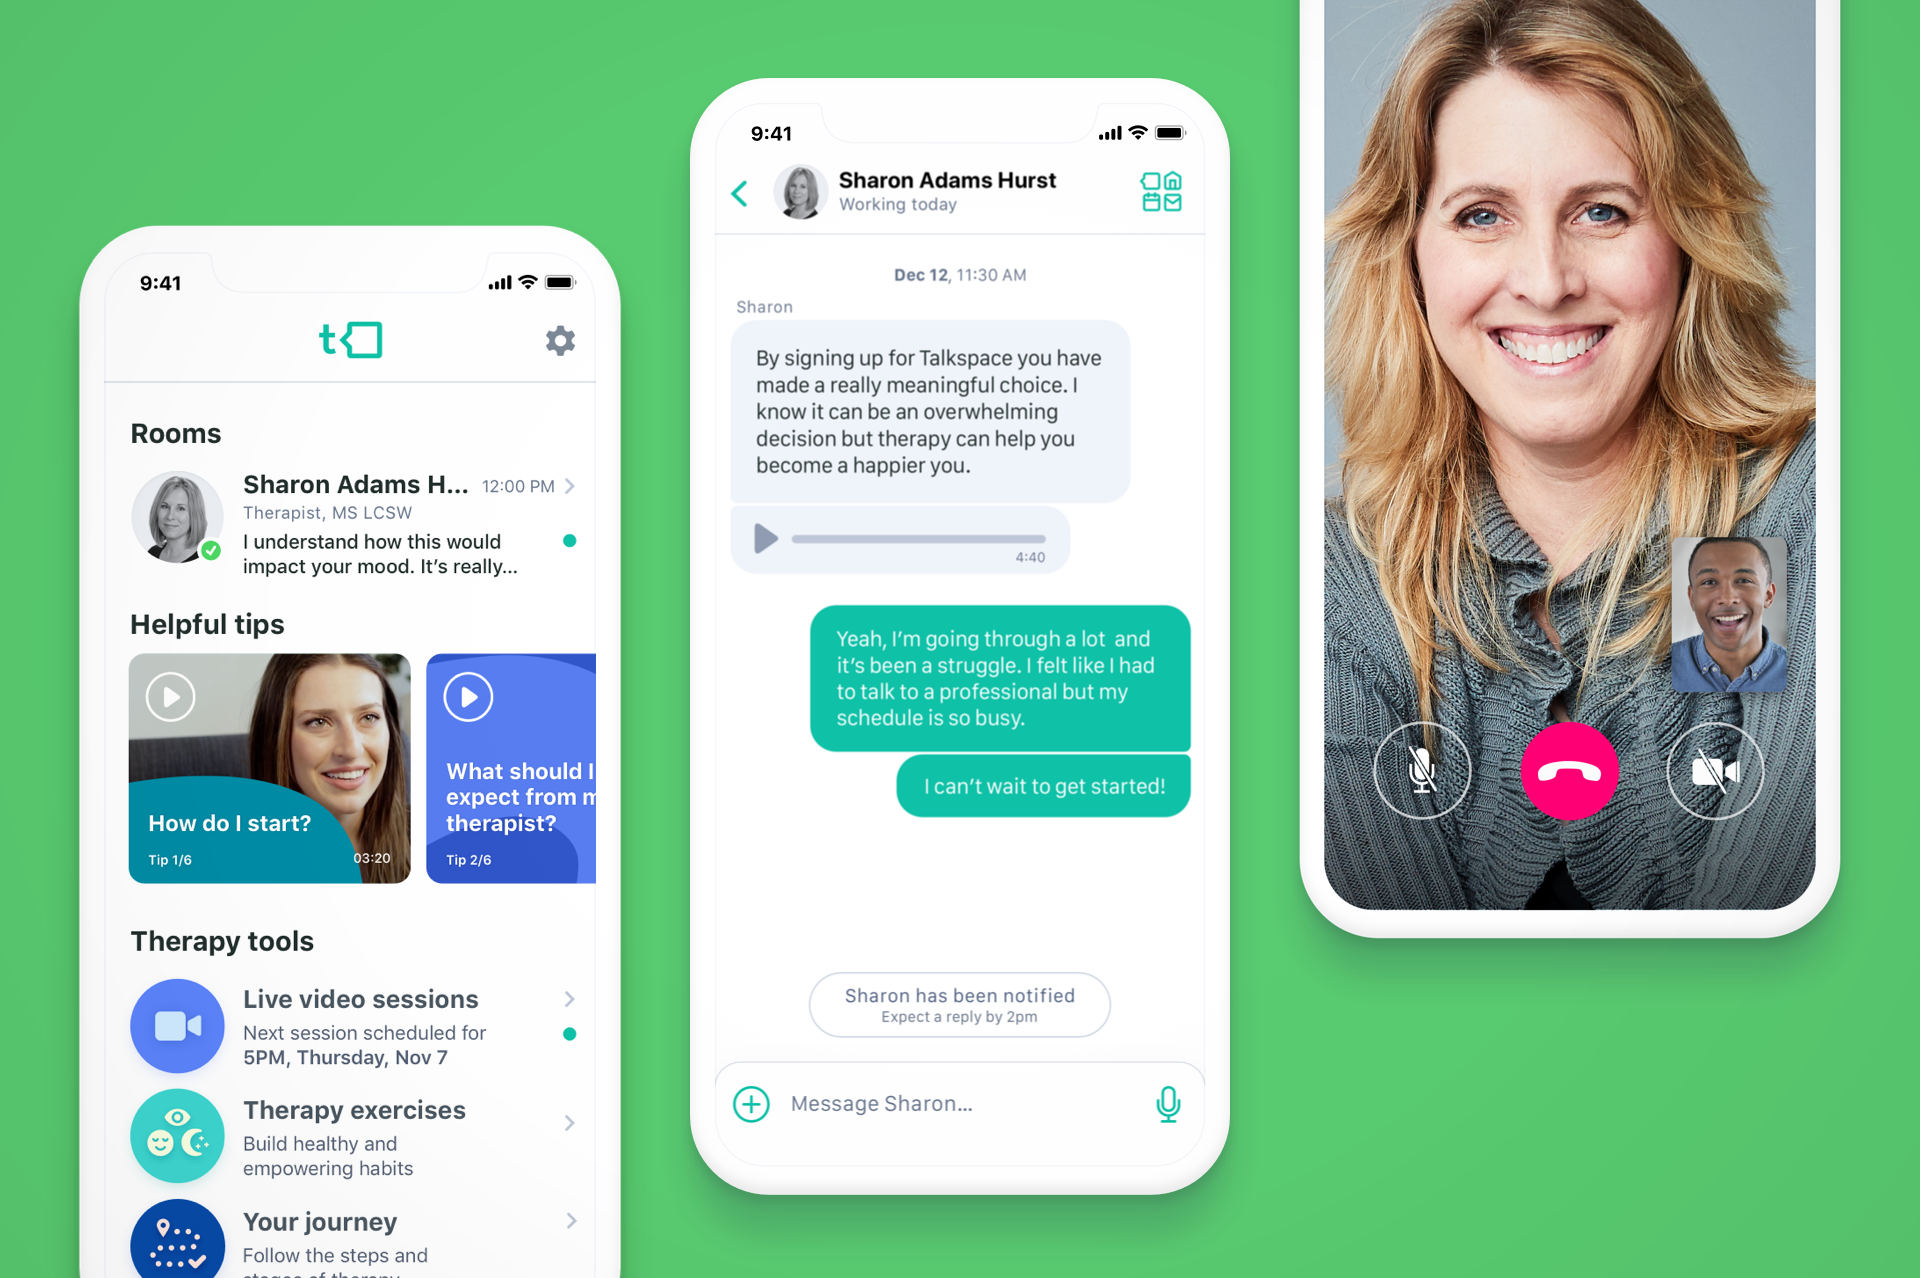 Three phone screens show the home page, chat room, and video conferencing via the Talkspace app